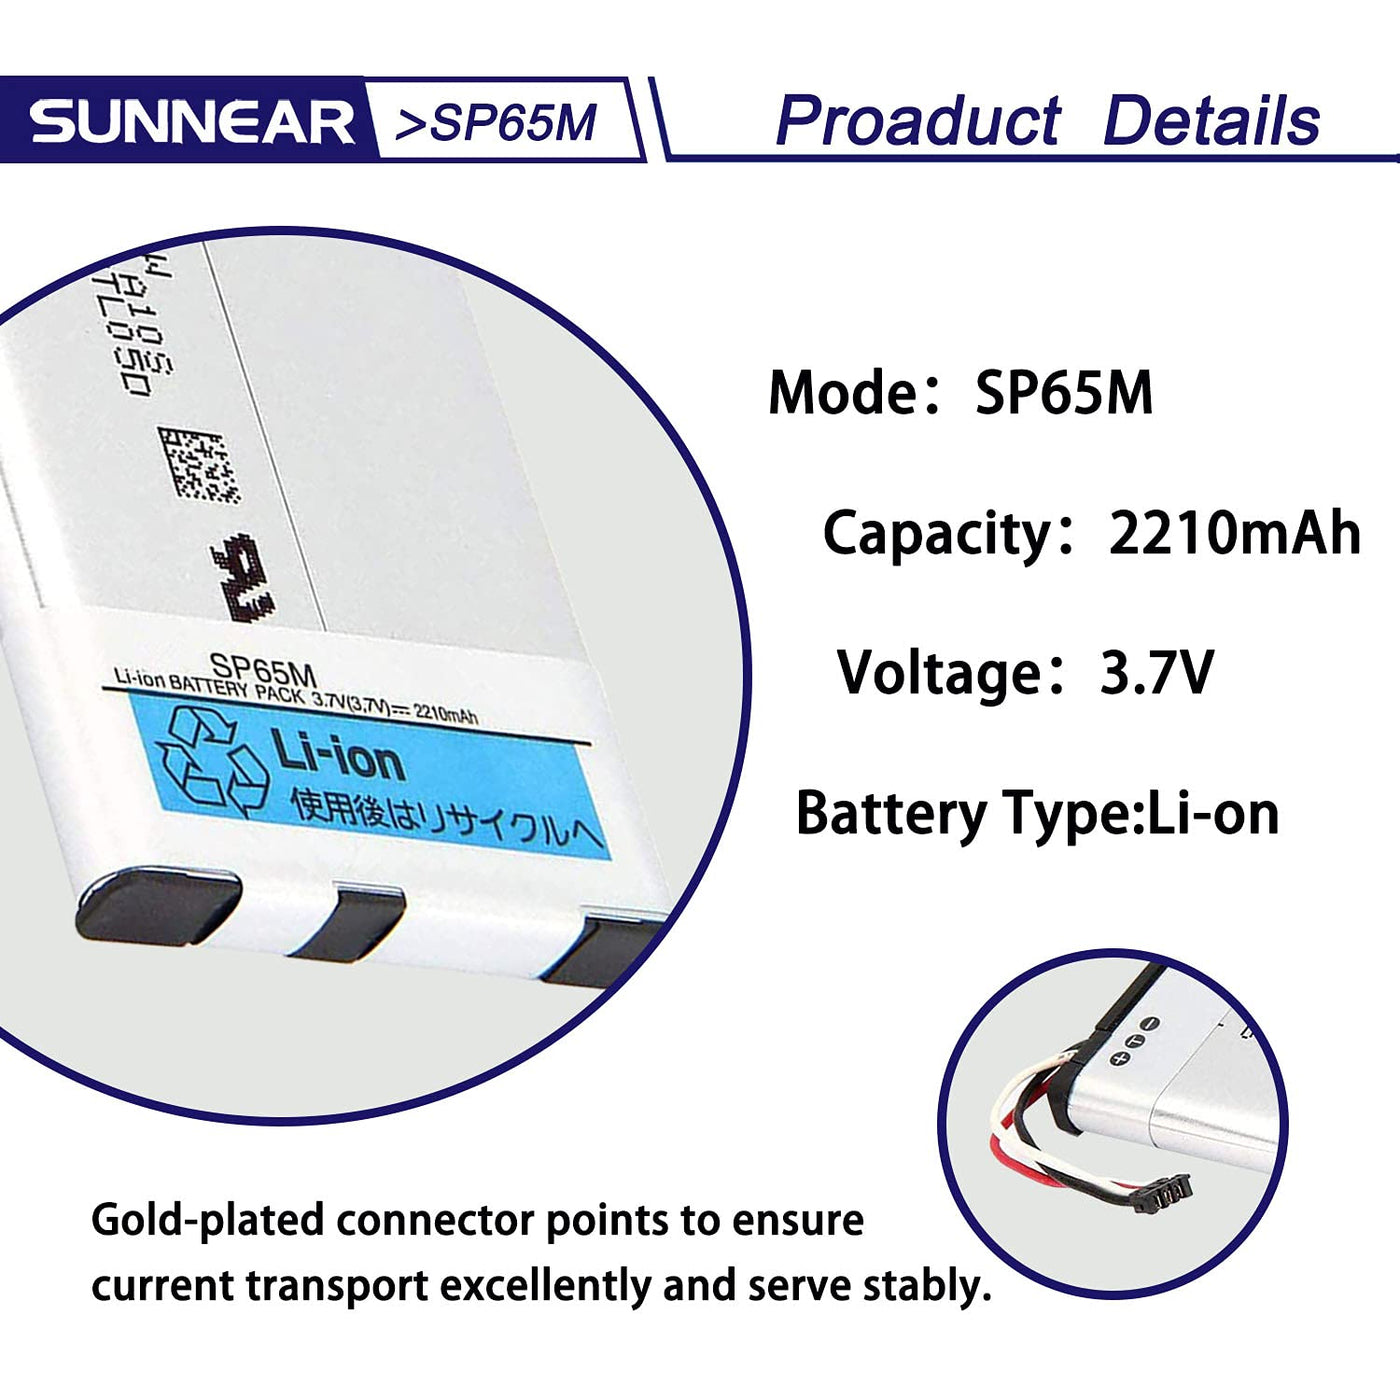 Sunnear Sp65m 3 7v 2210mah Battery Replacement For Sony Playstation Ps Vita Pch 1001 Pch 1101 1003 1103 Battery With Tools